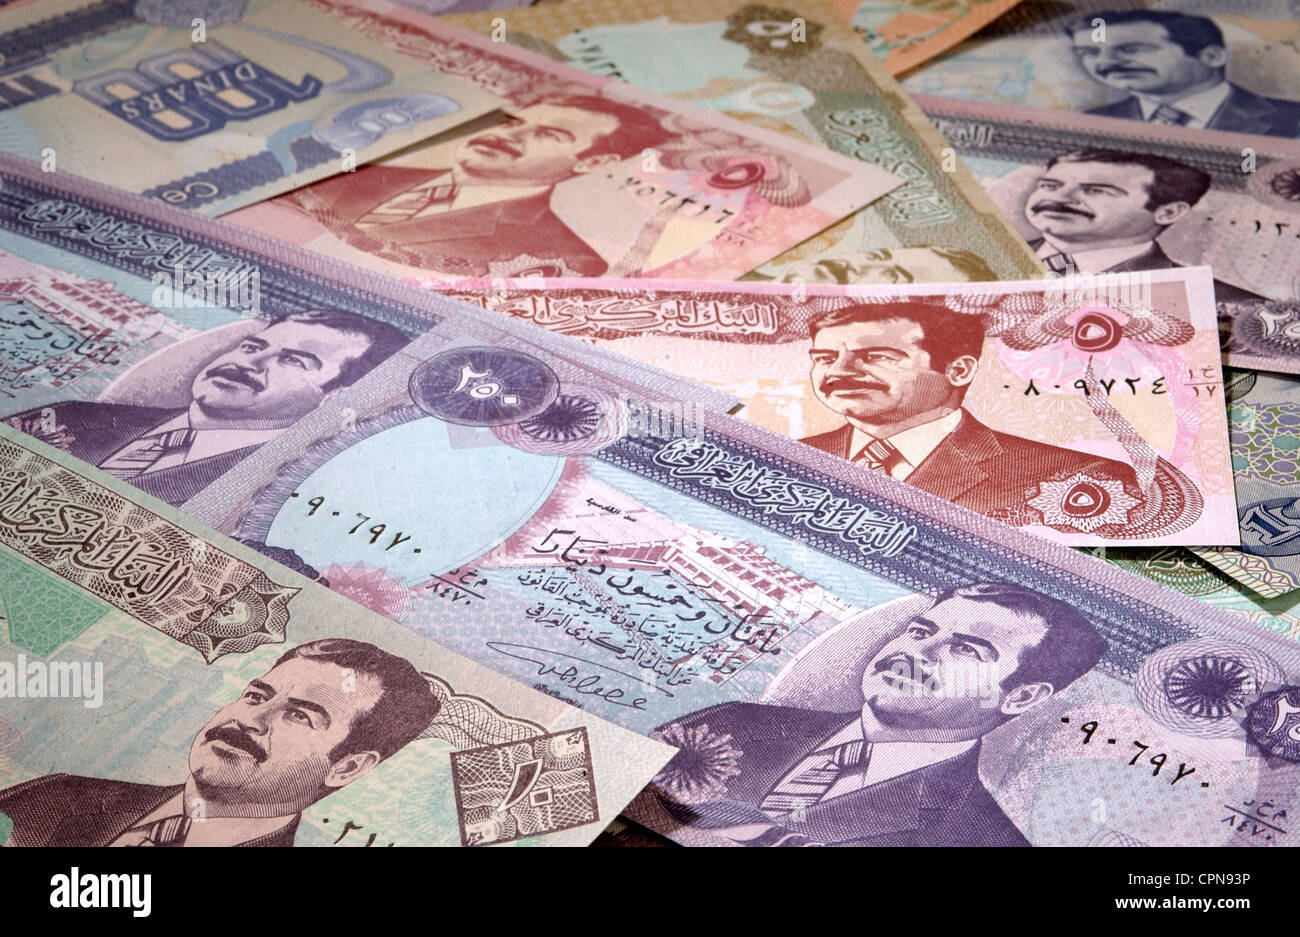 money / finances, banknote, Iraq, dinar, Iraqi banknote with the portrait of Saddam Hussein, currency, currencies, valuta, dinar, symbol, symbols, symbolic, symbolical, symbol image, economy, Iraqi, money, miscellaneous, several, personality cult, dictator, dictators, banknote, bank note, bill, bank notes, historic, historical, Additional-Rights-Clearences-Not Available Stock Photo